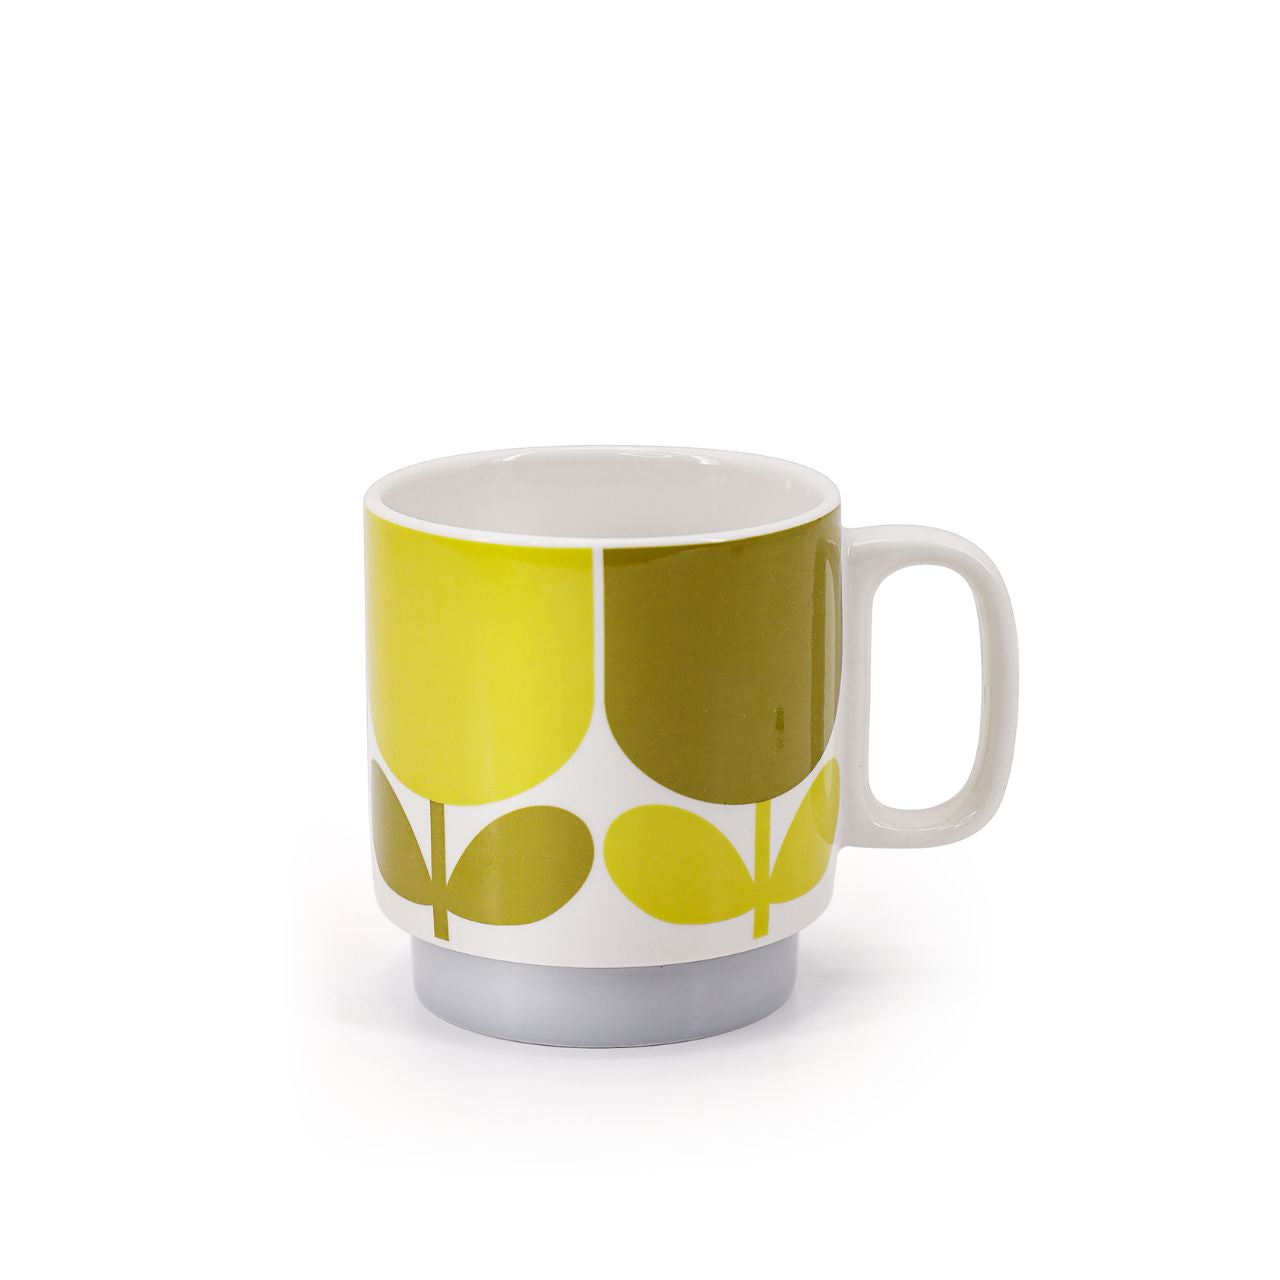 Tipperary Orla Kiely Block Flower Slate Ochre Set 2 Stacking Mugs  DESIGNED IN THE UK BY ORLA KIELY: This set of two mugs has a unique 'Block Flower' print and is designed to be stacked.  Each mug is stamped with an authentic Orla Kiely logo.